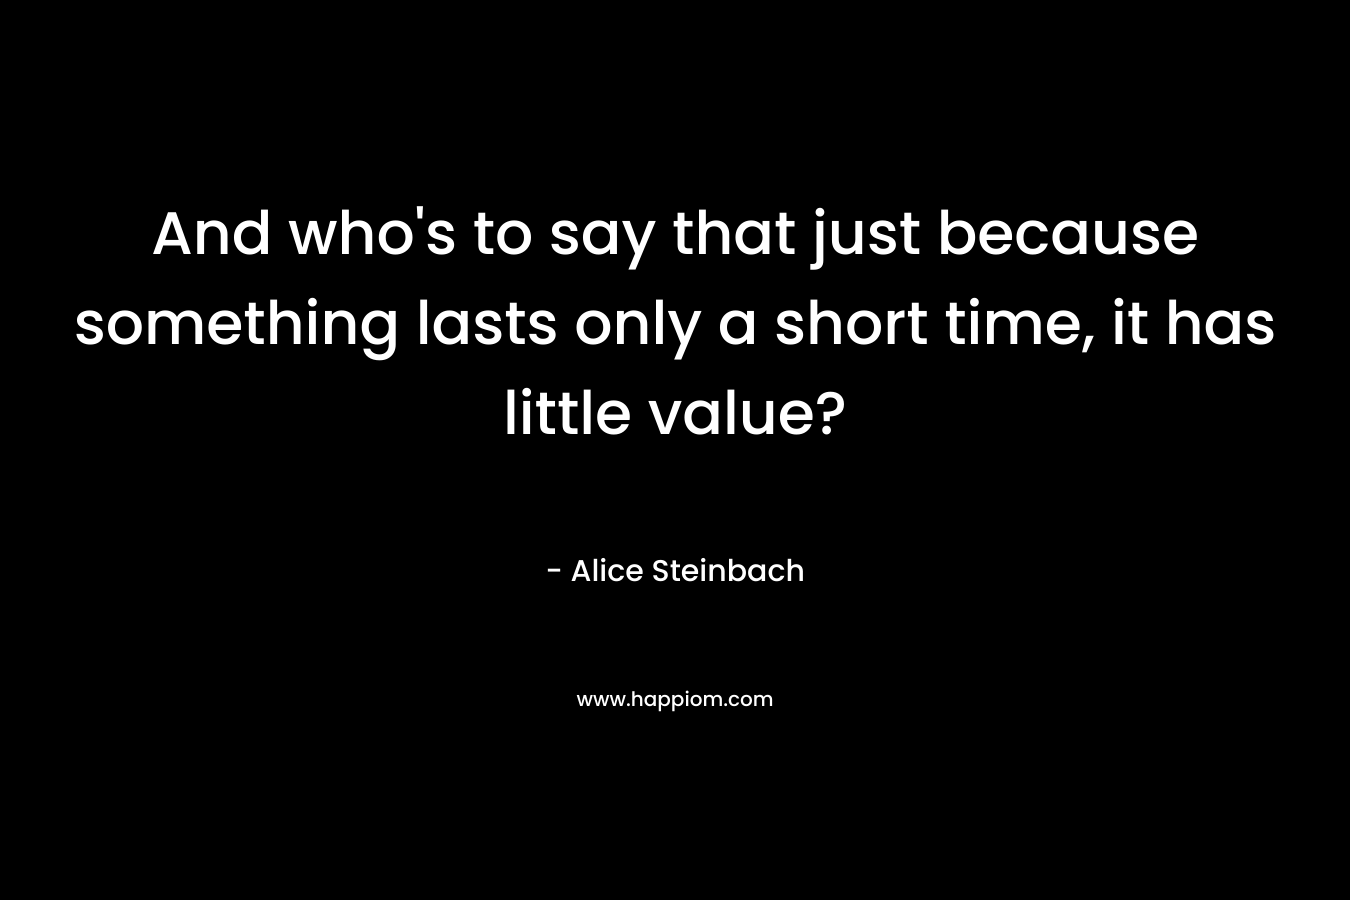 And who's to say that just because something lasts only a short time, it has little value?